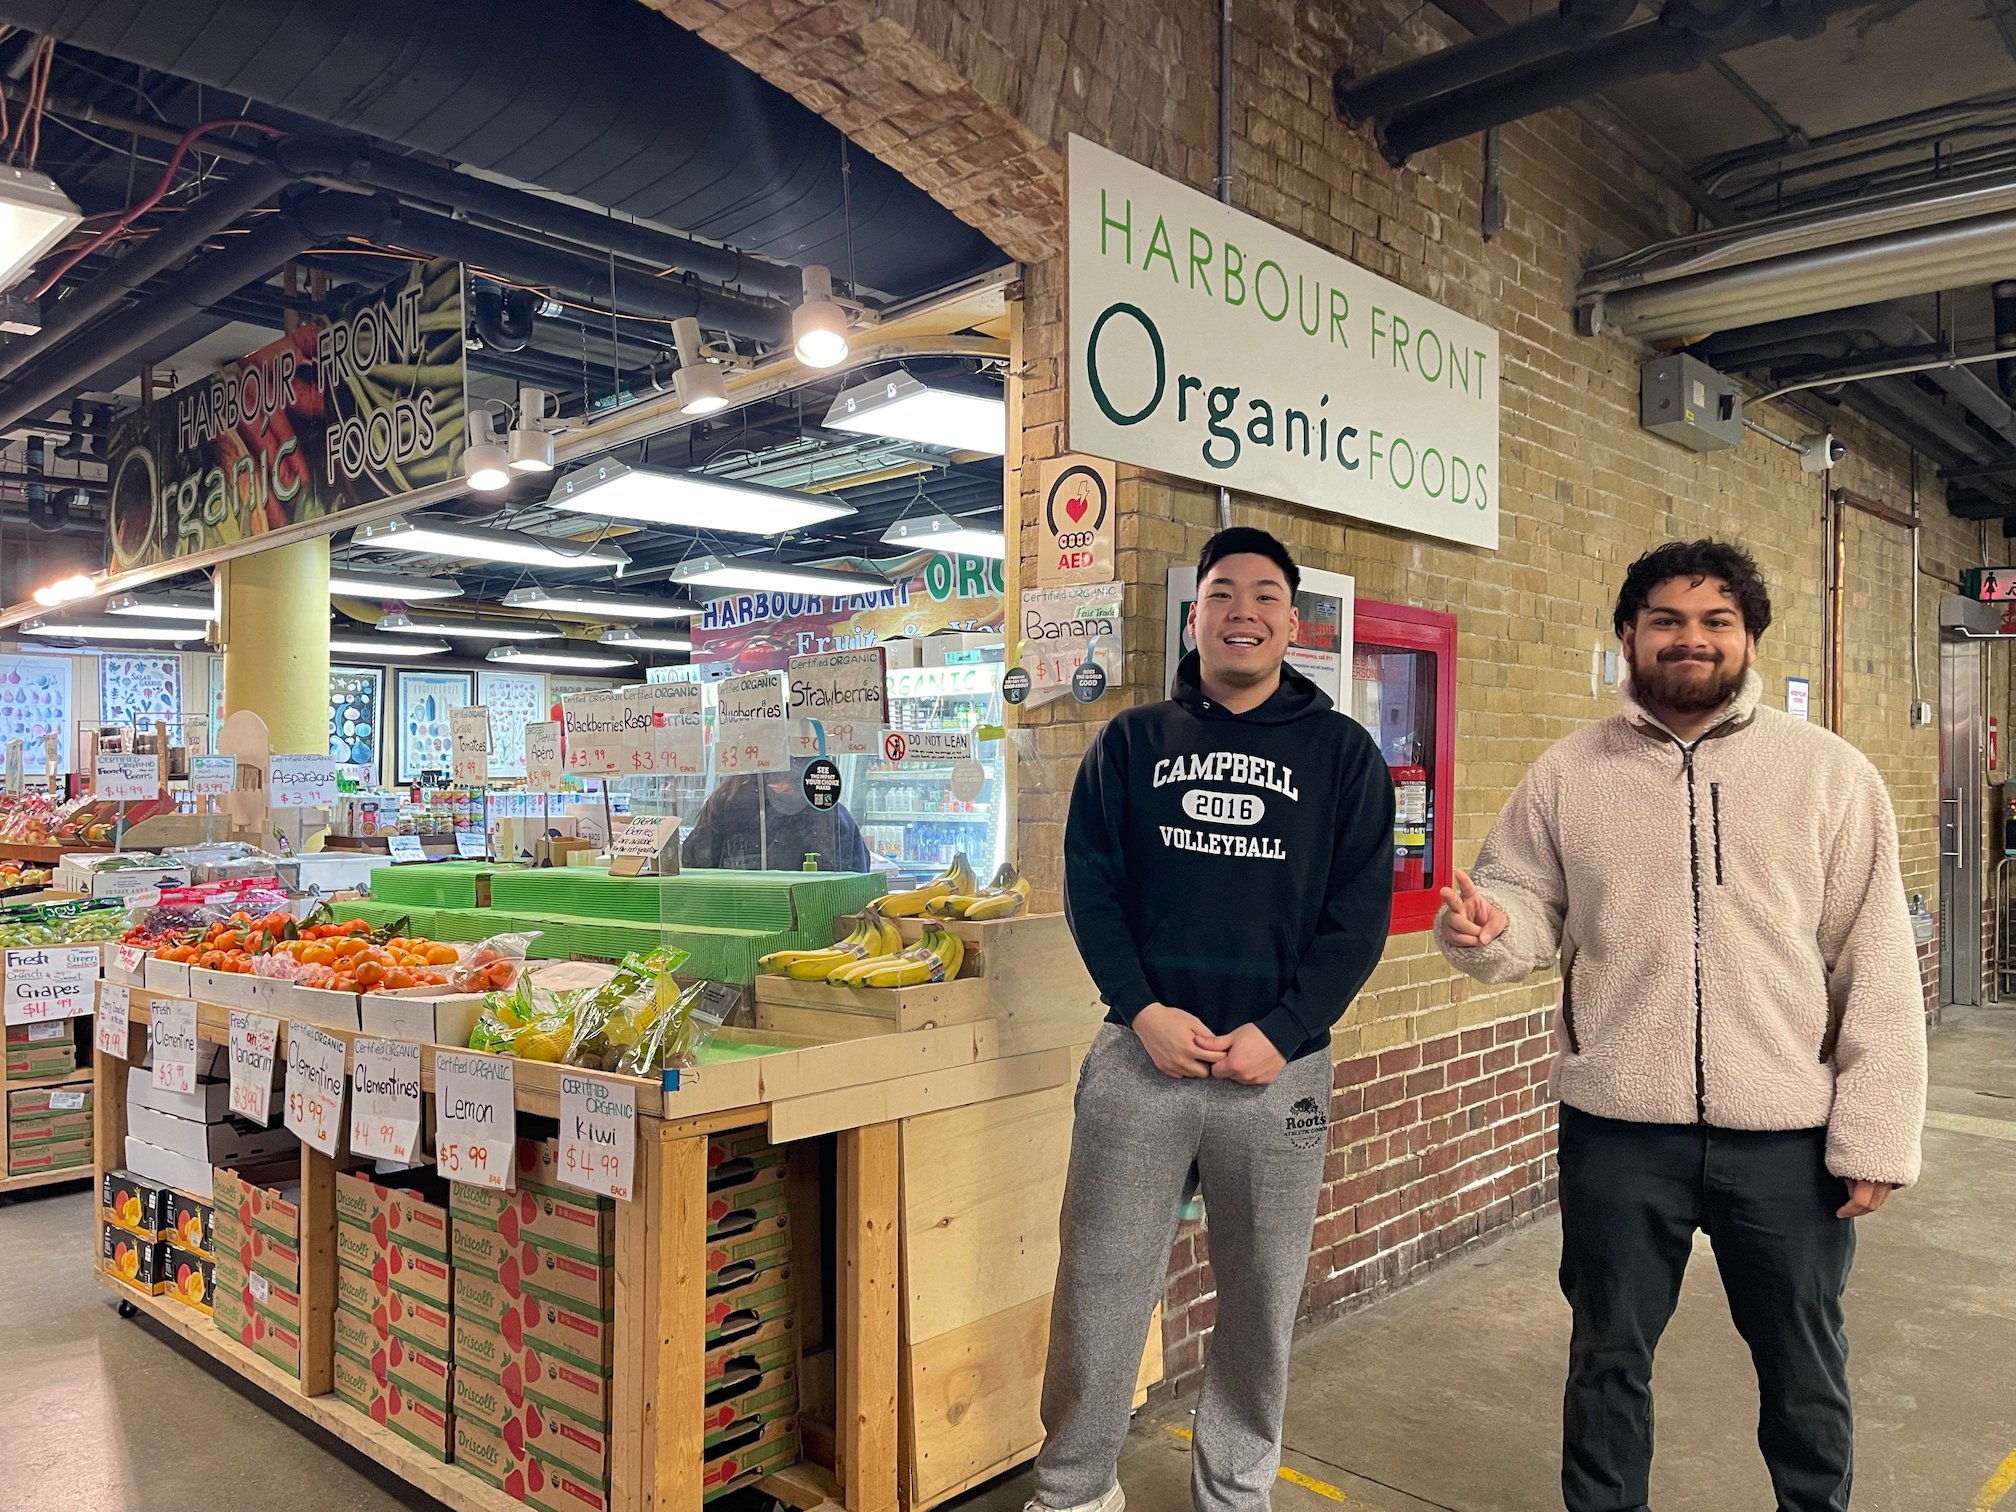 Two male students strike a pose in front of an organic food storefront